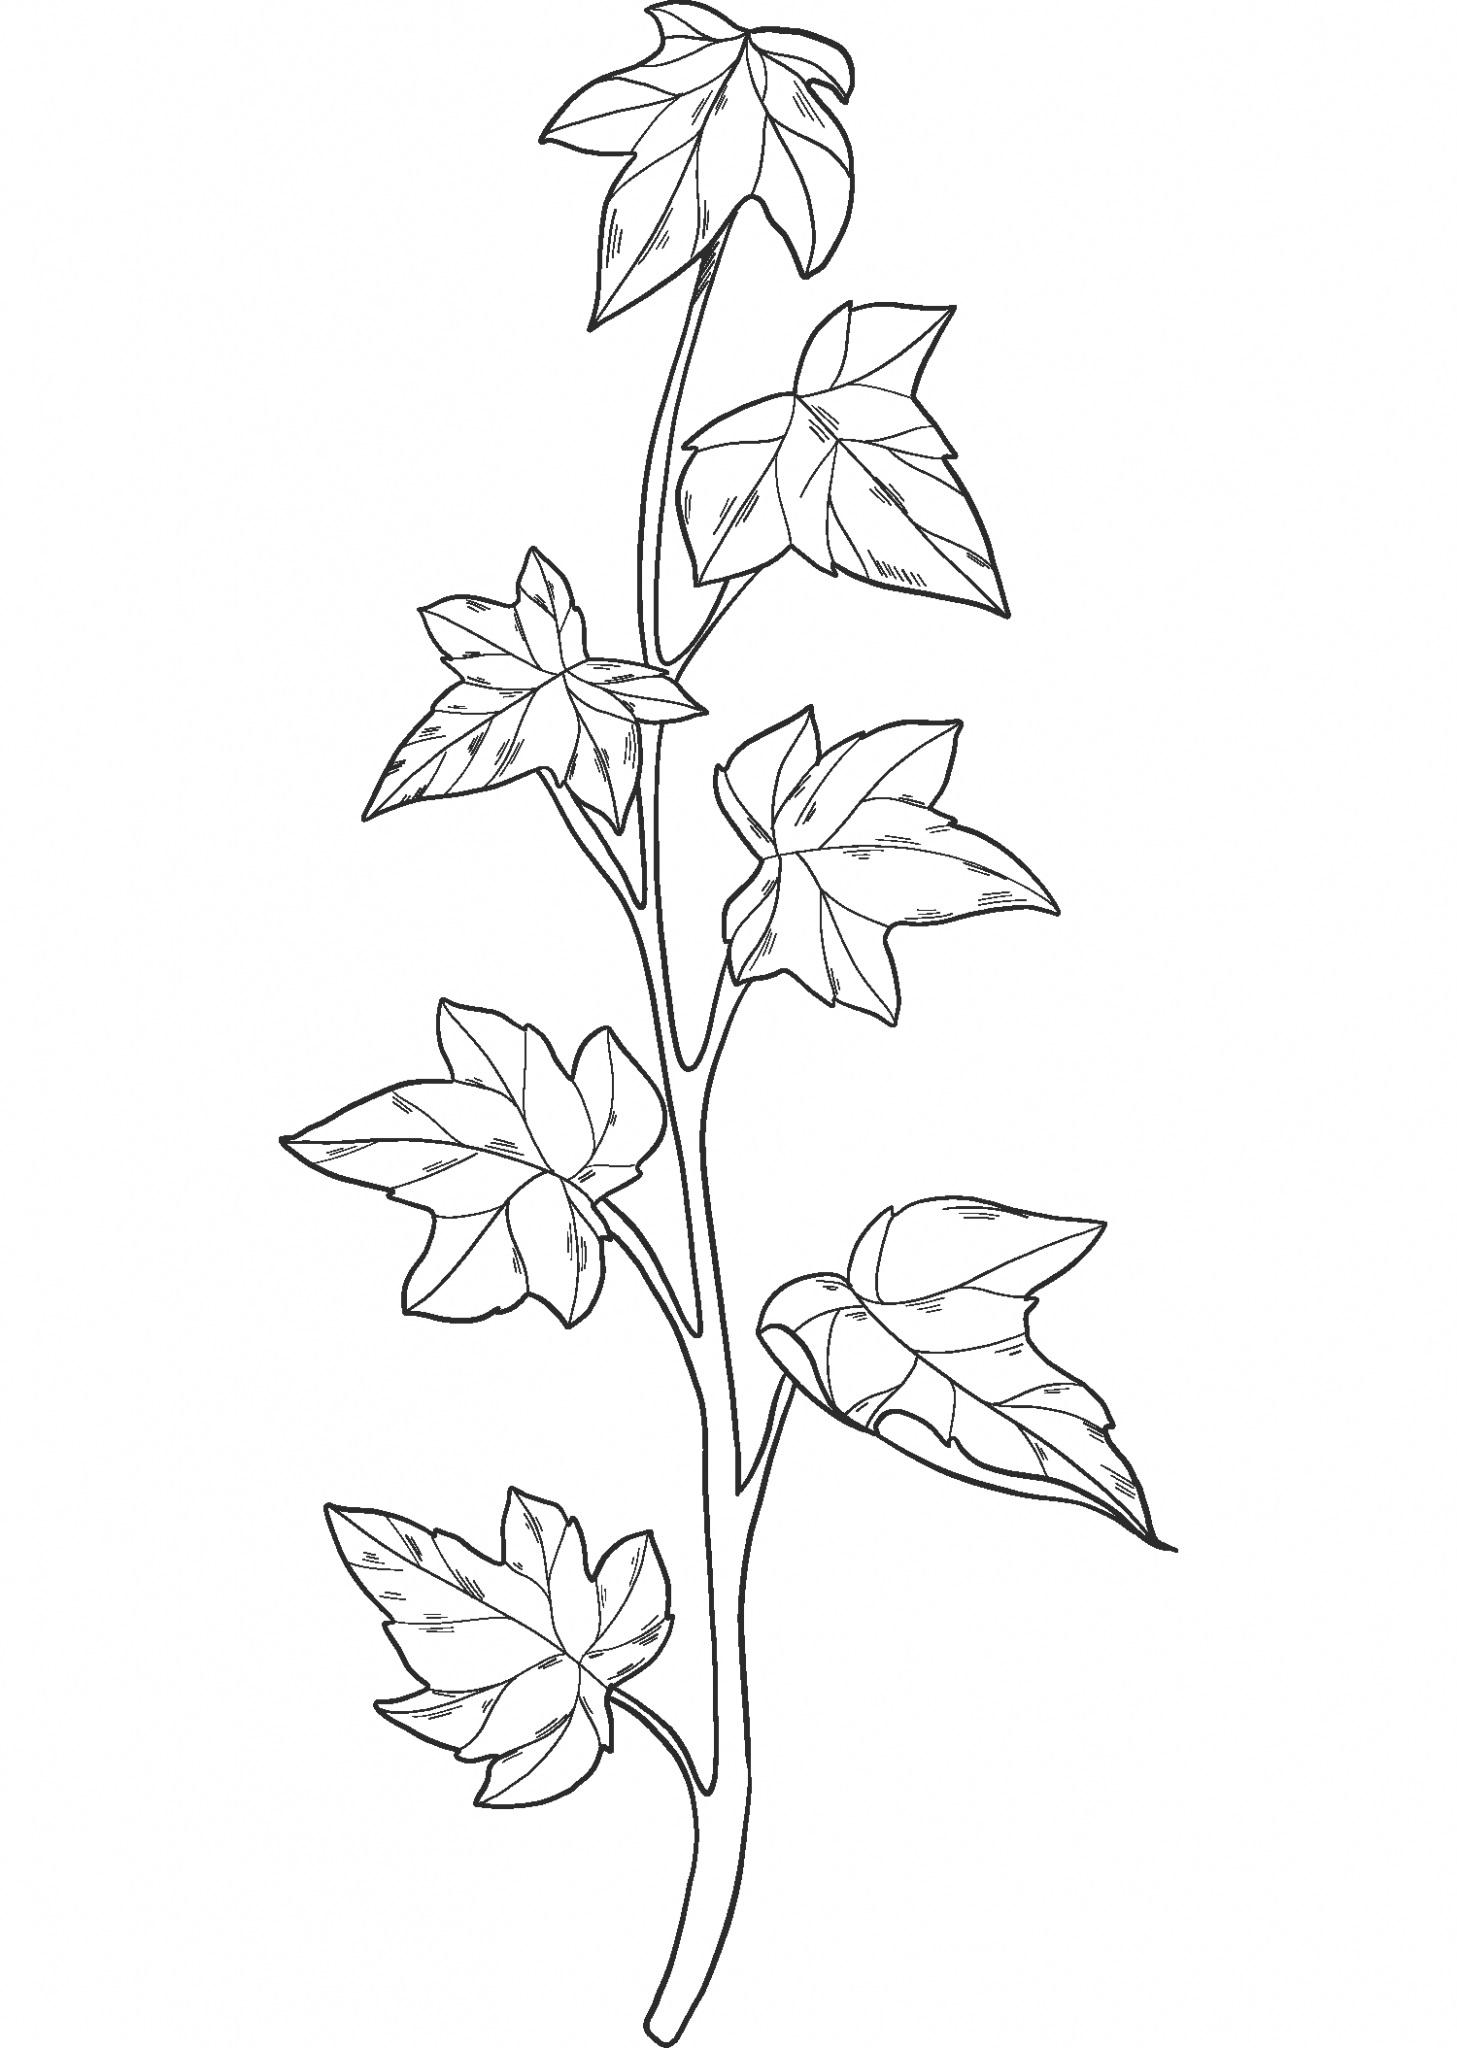 Ivy coloring page - ColouringPages